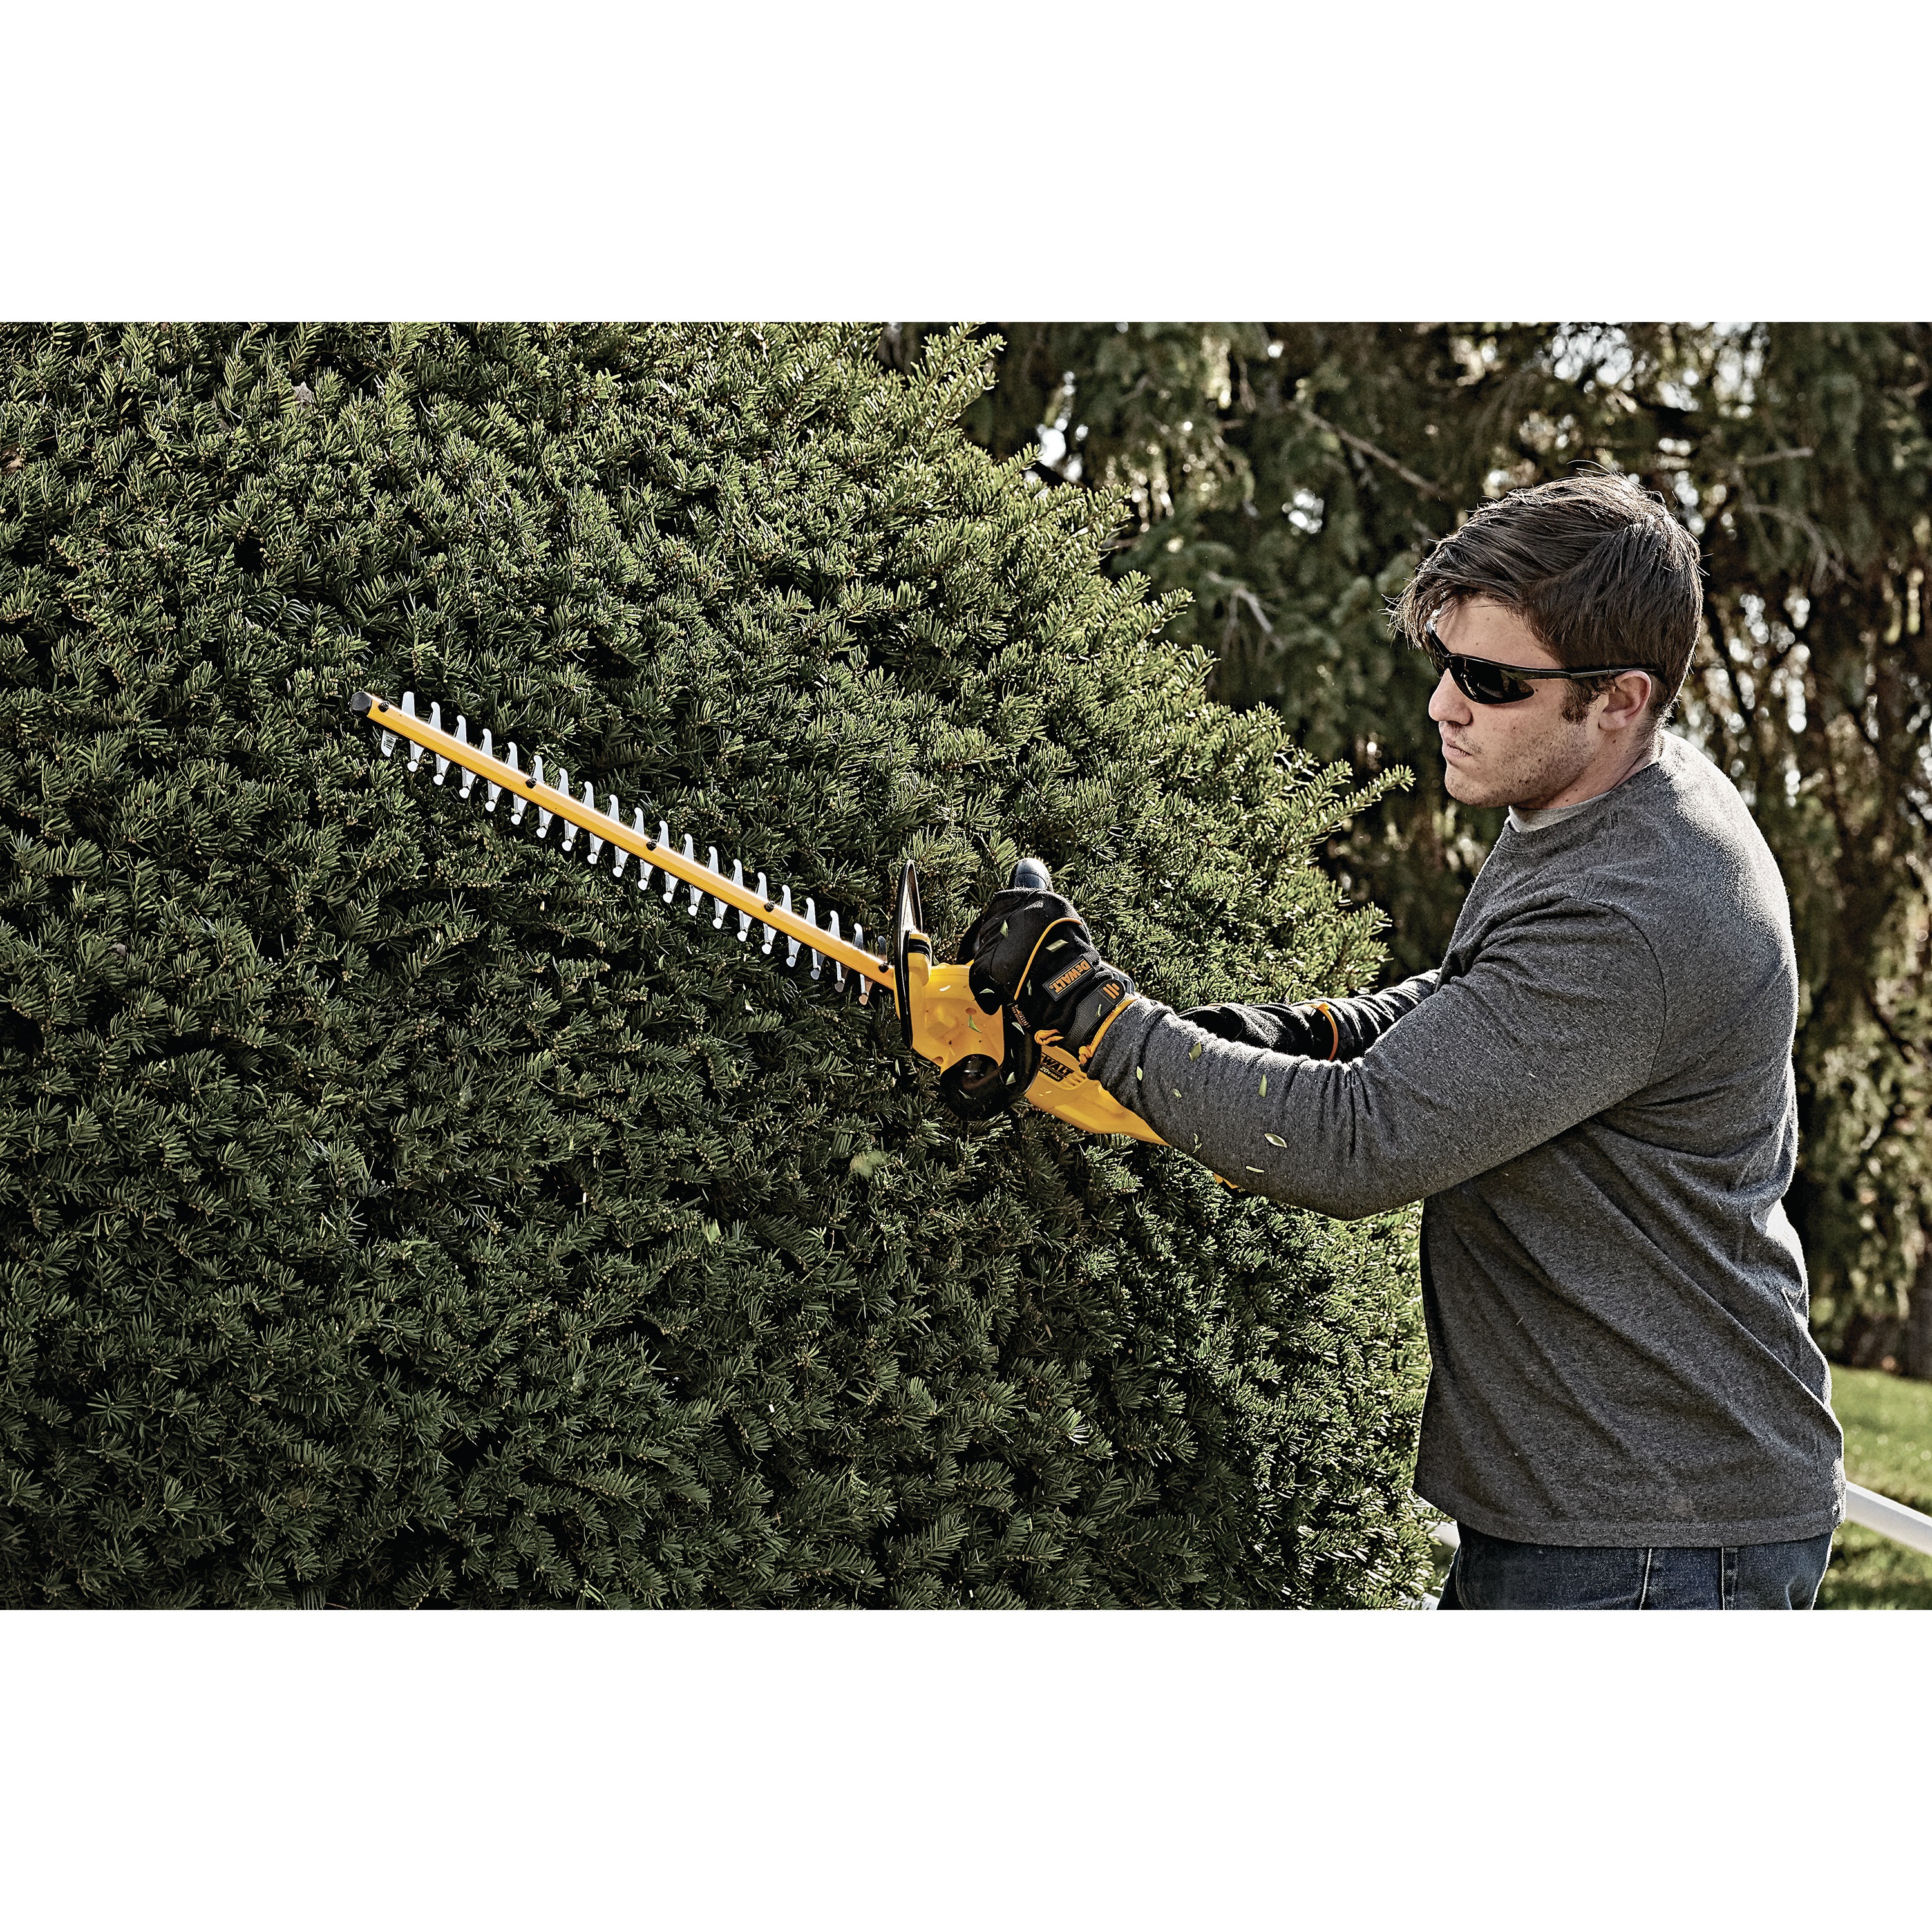 Lithium ion hedge trimmer being used by a person to mend hedge